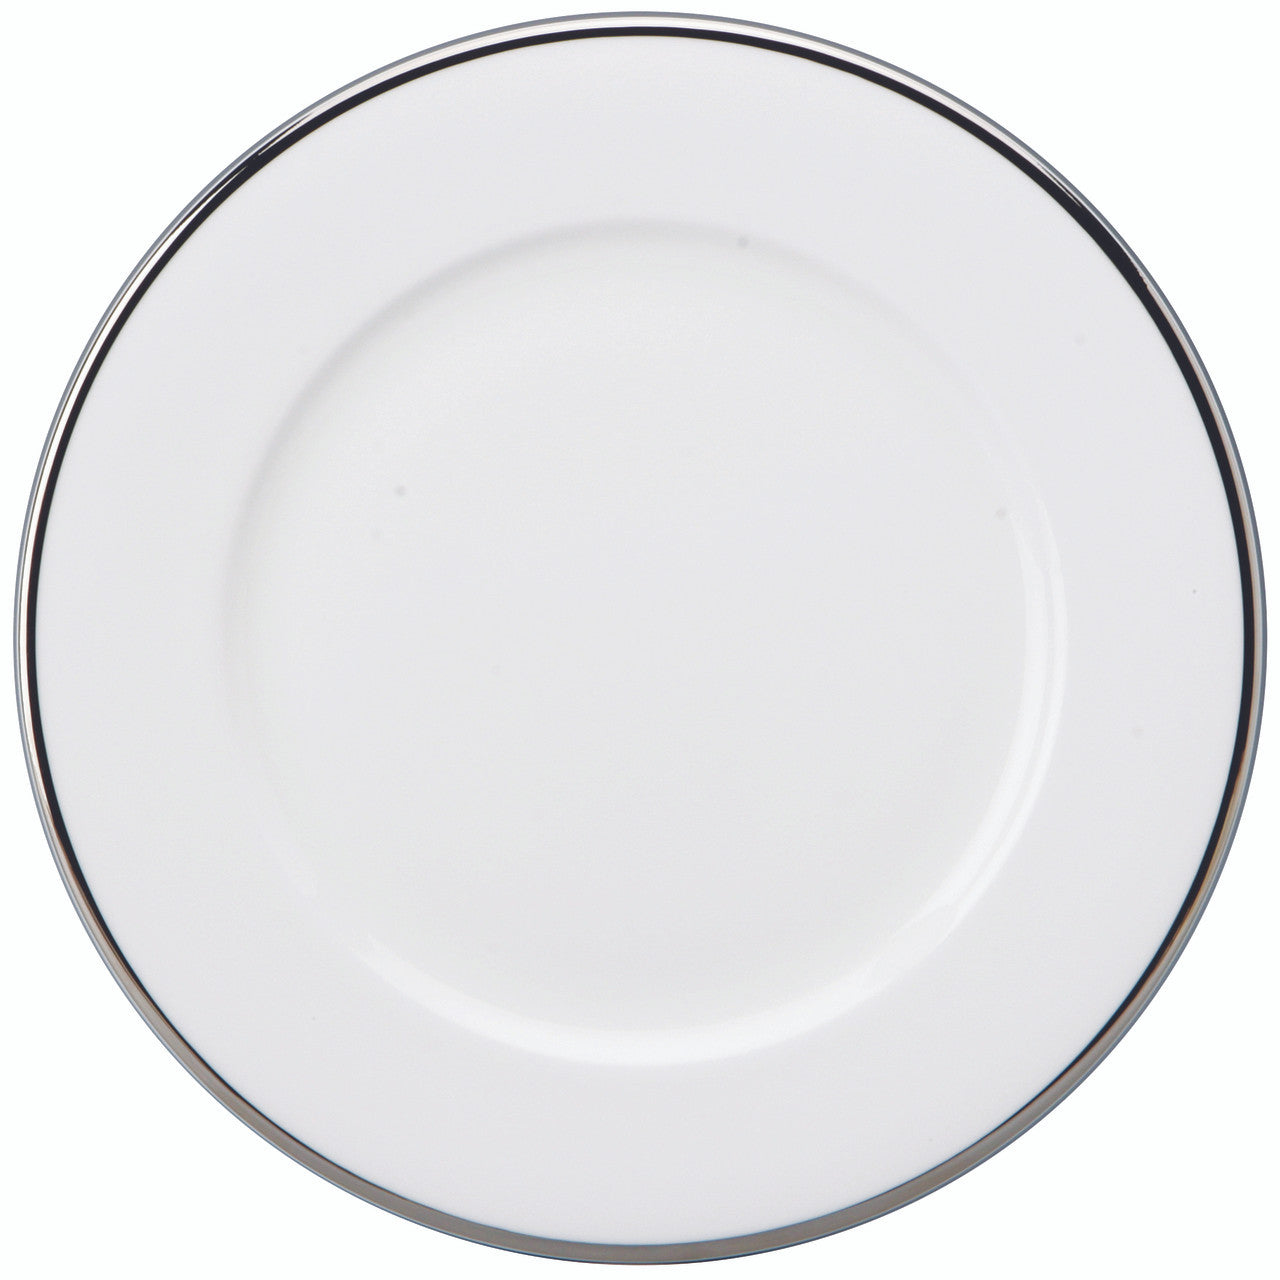 Prouna Comet Charger Plate